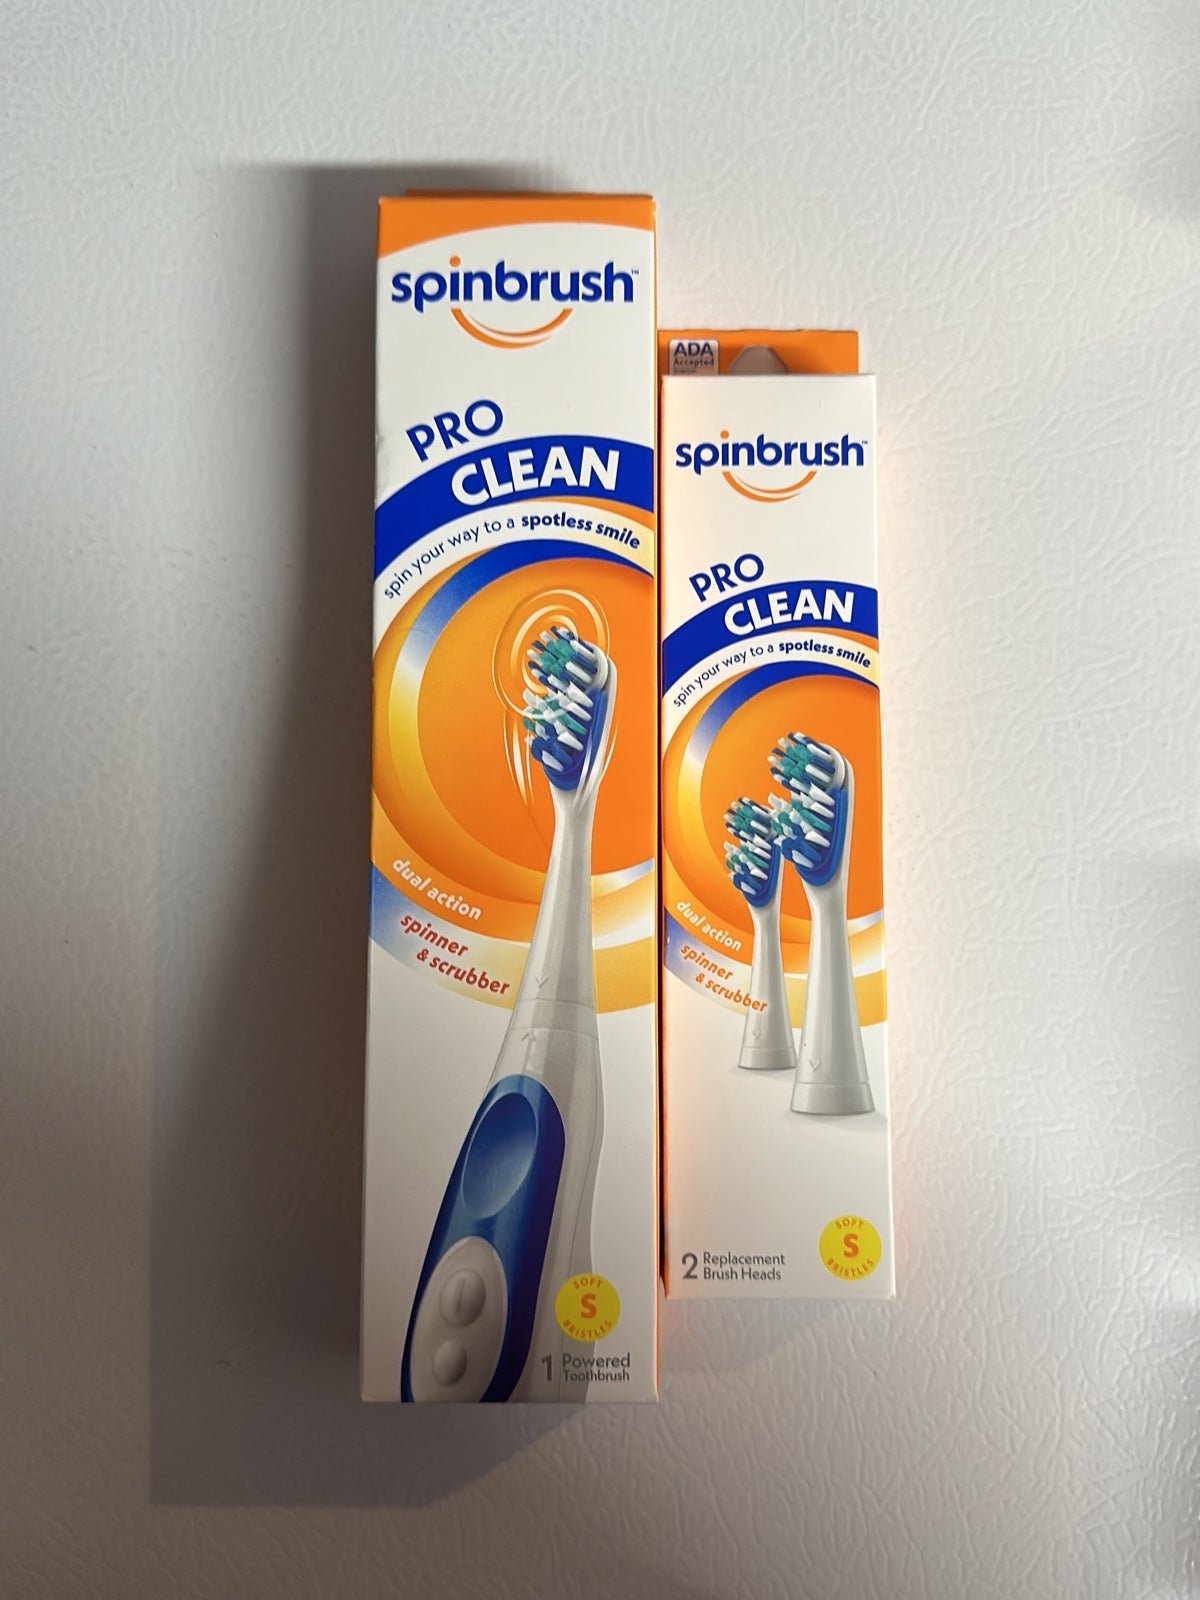 Spinbrush Pro Clean Battery Powered Toothbrush obmKvCdjT